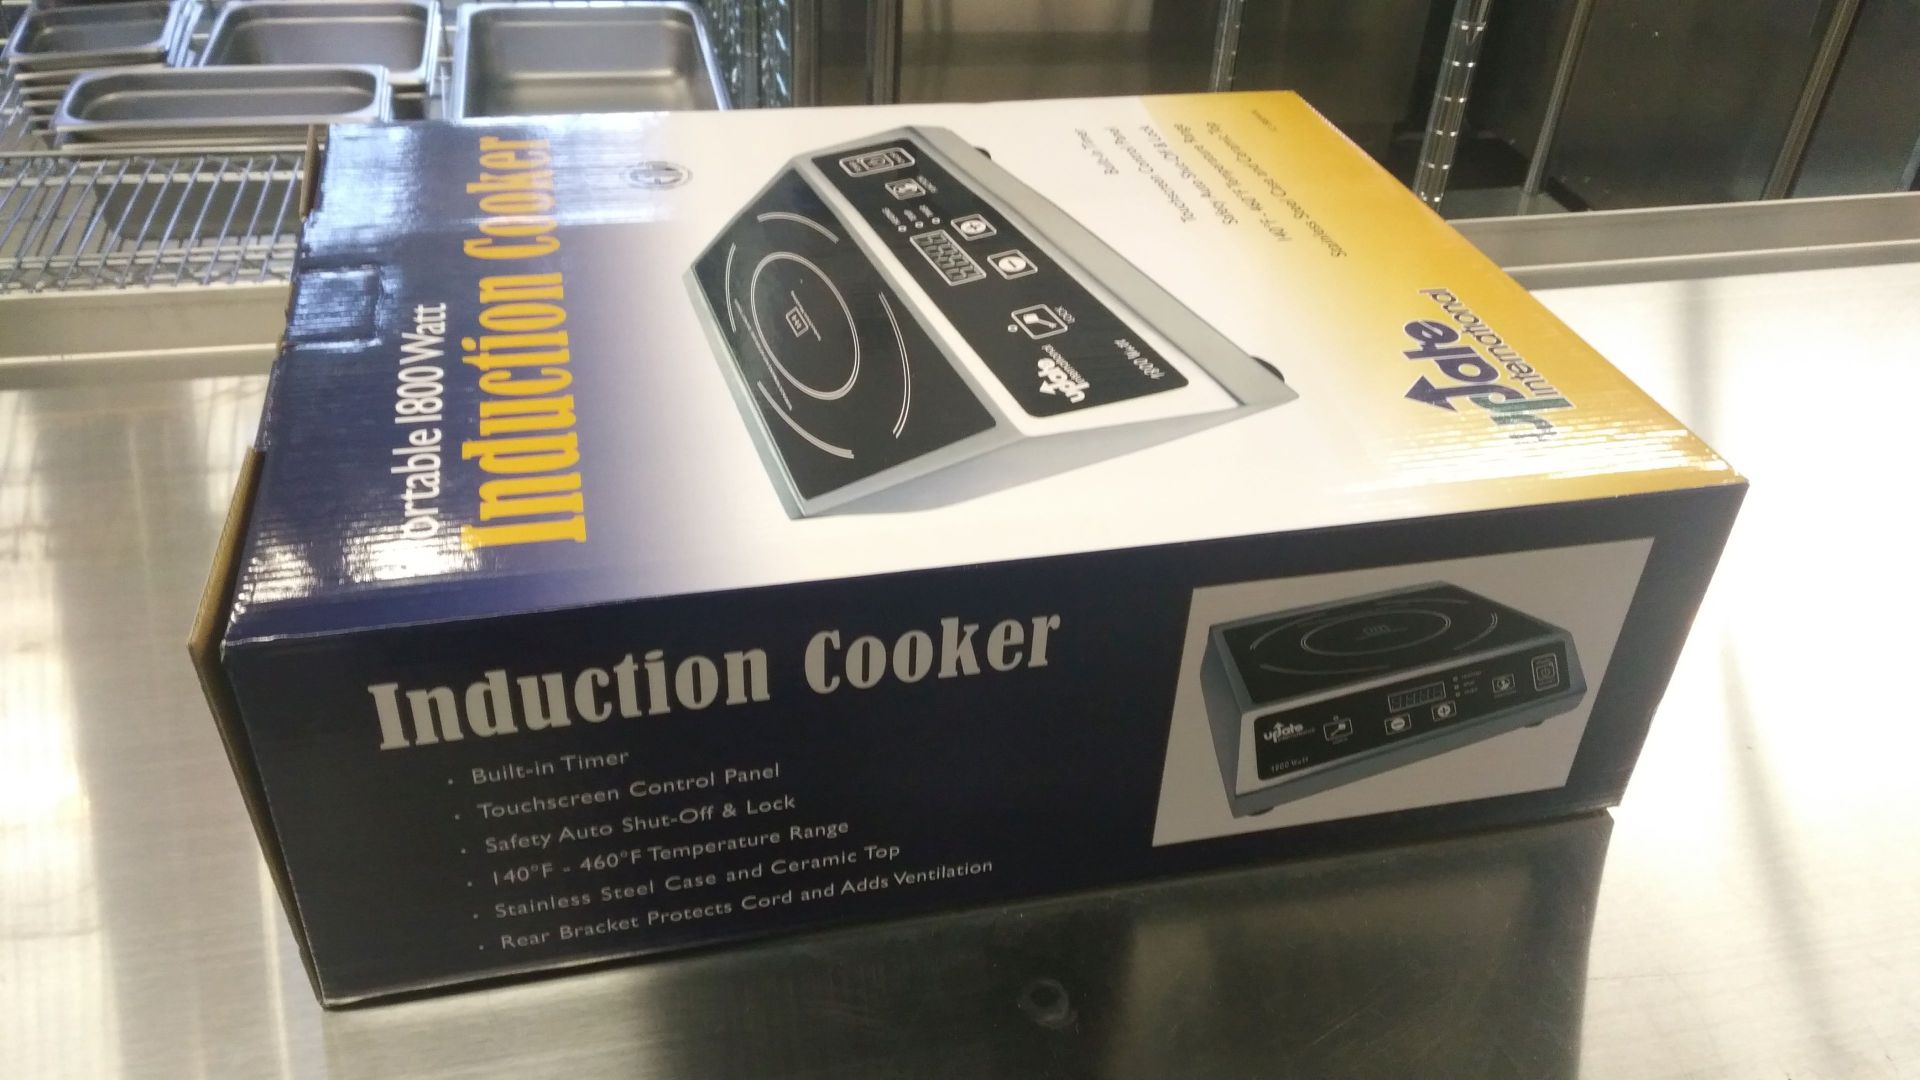 Update IC-1800WN Countertop Commercial Induction Cooktop - Image 2 of 3